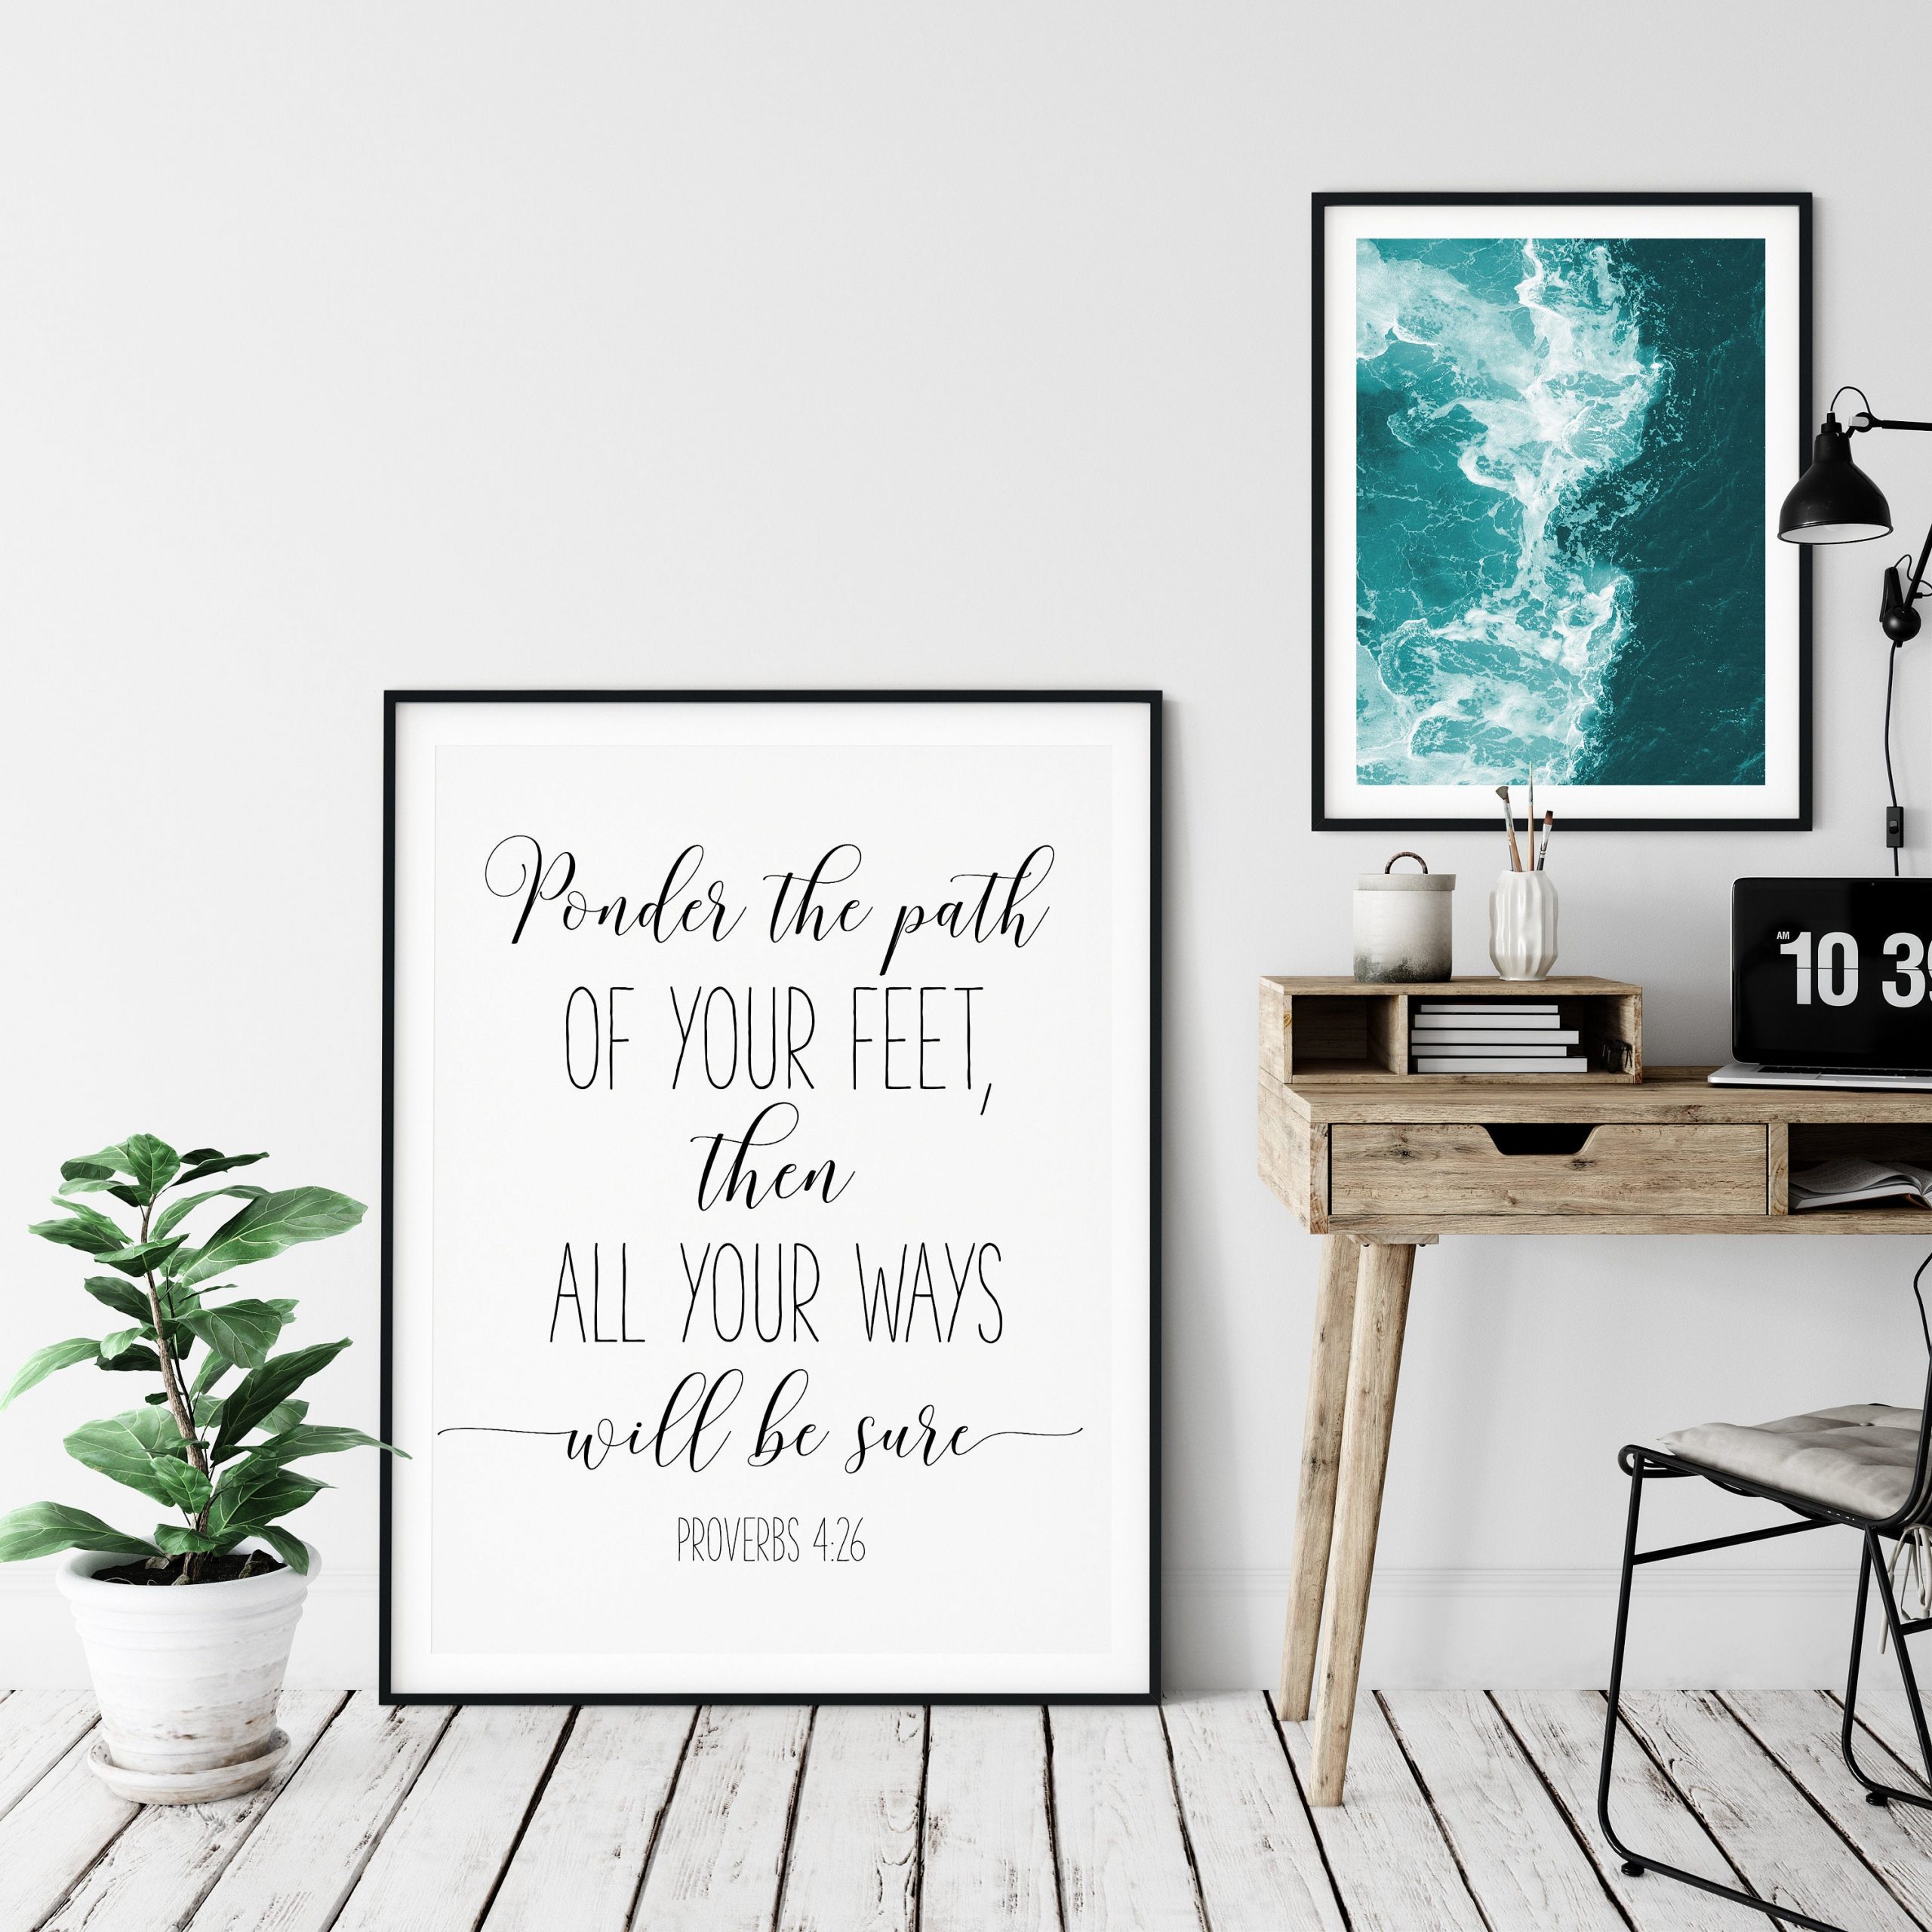 Ponder The Path Of Your Feet, Proverbs 4:26, Bible Verse Printable Wall Art,Nursery Bible Quotes